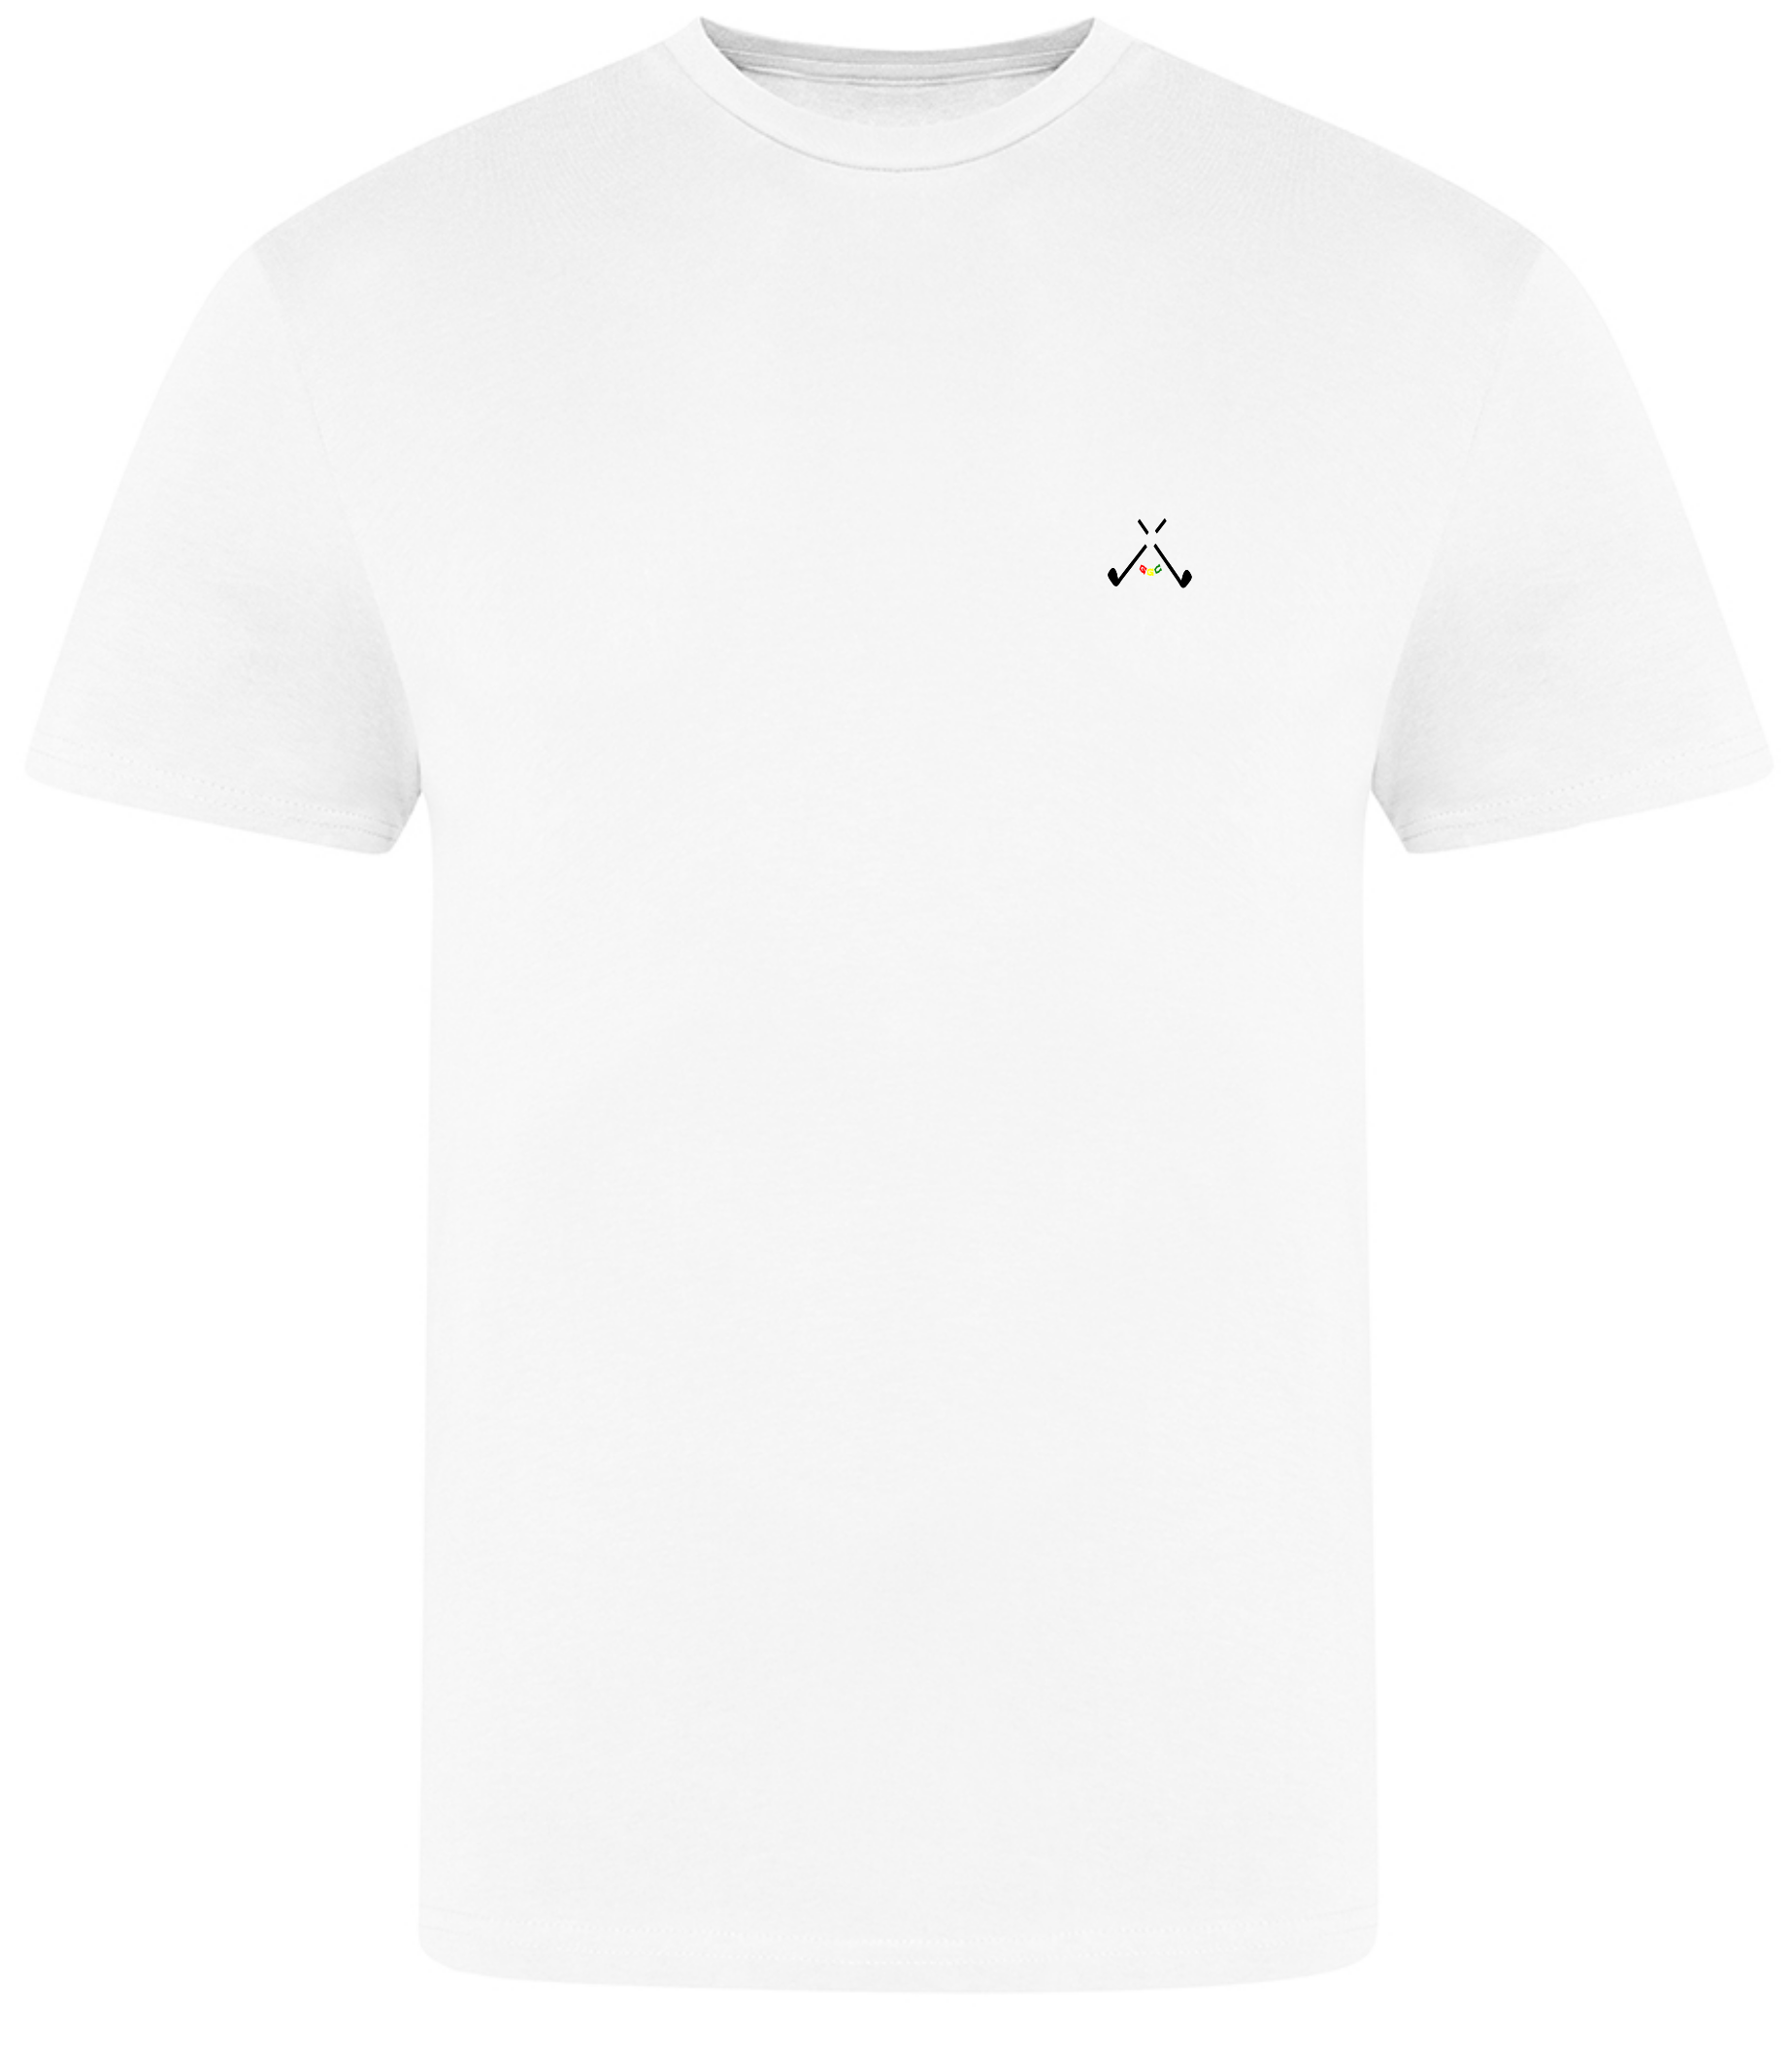 Golf god clothing white crossed clubs t shirt